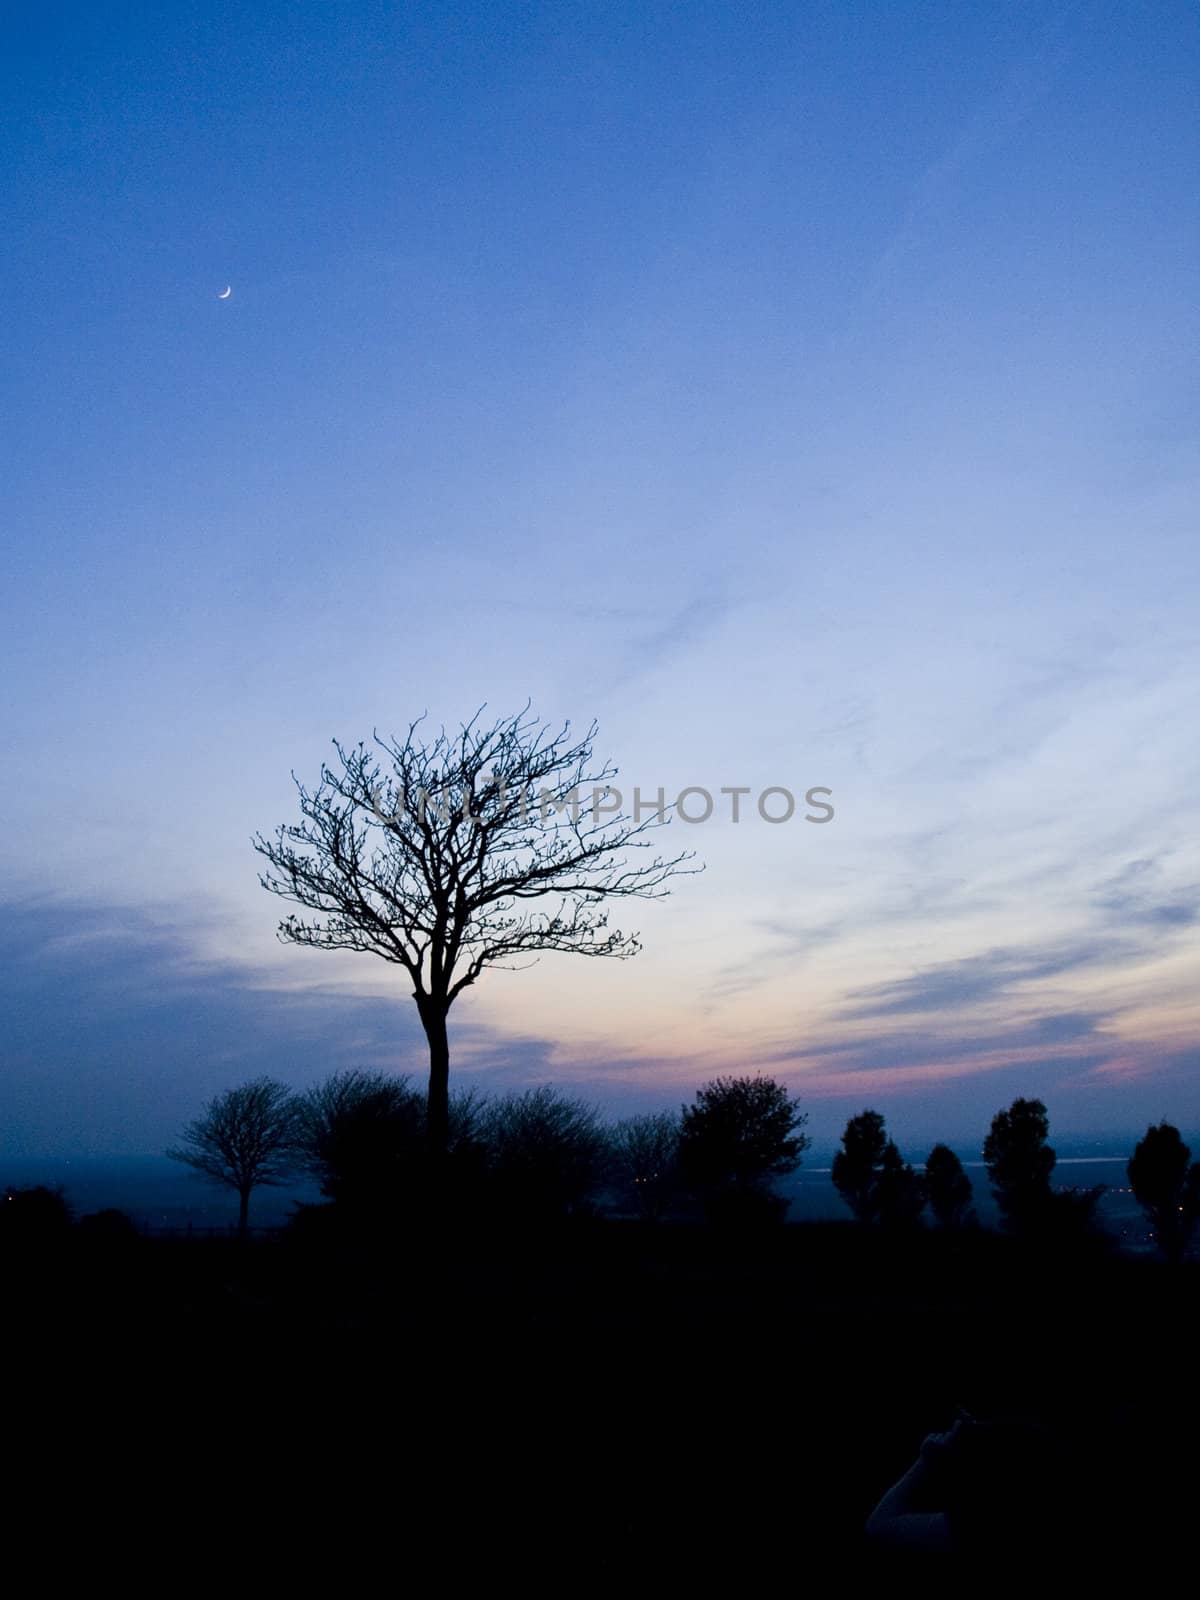 Tree Silhouette At Dusk by bobbigmac